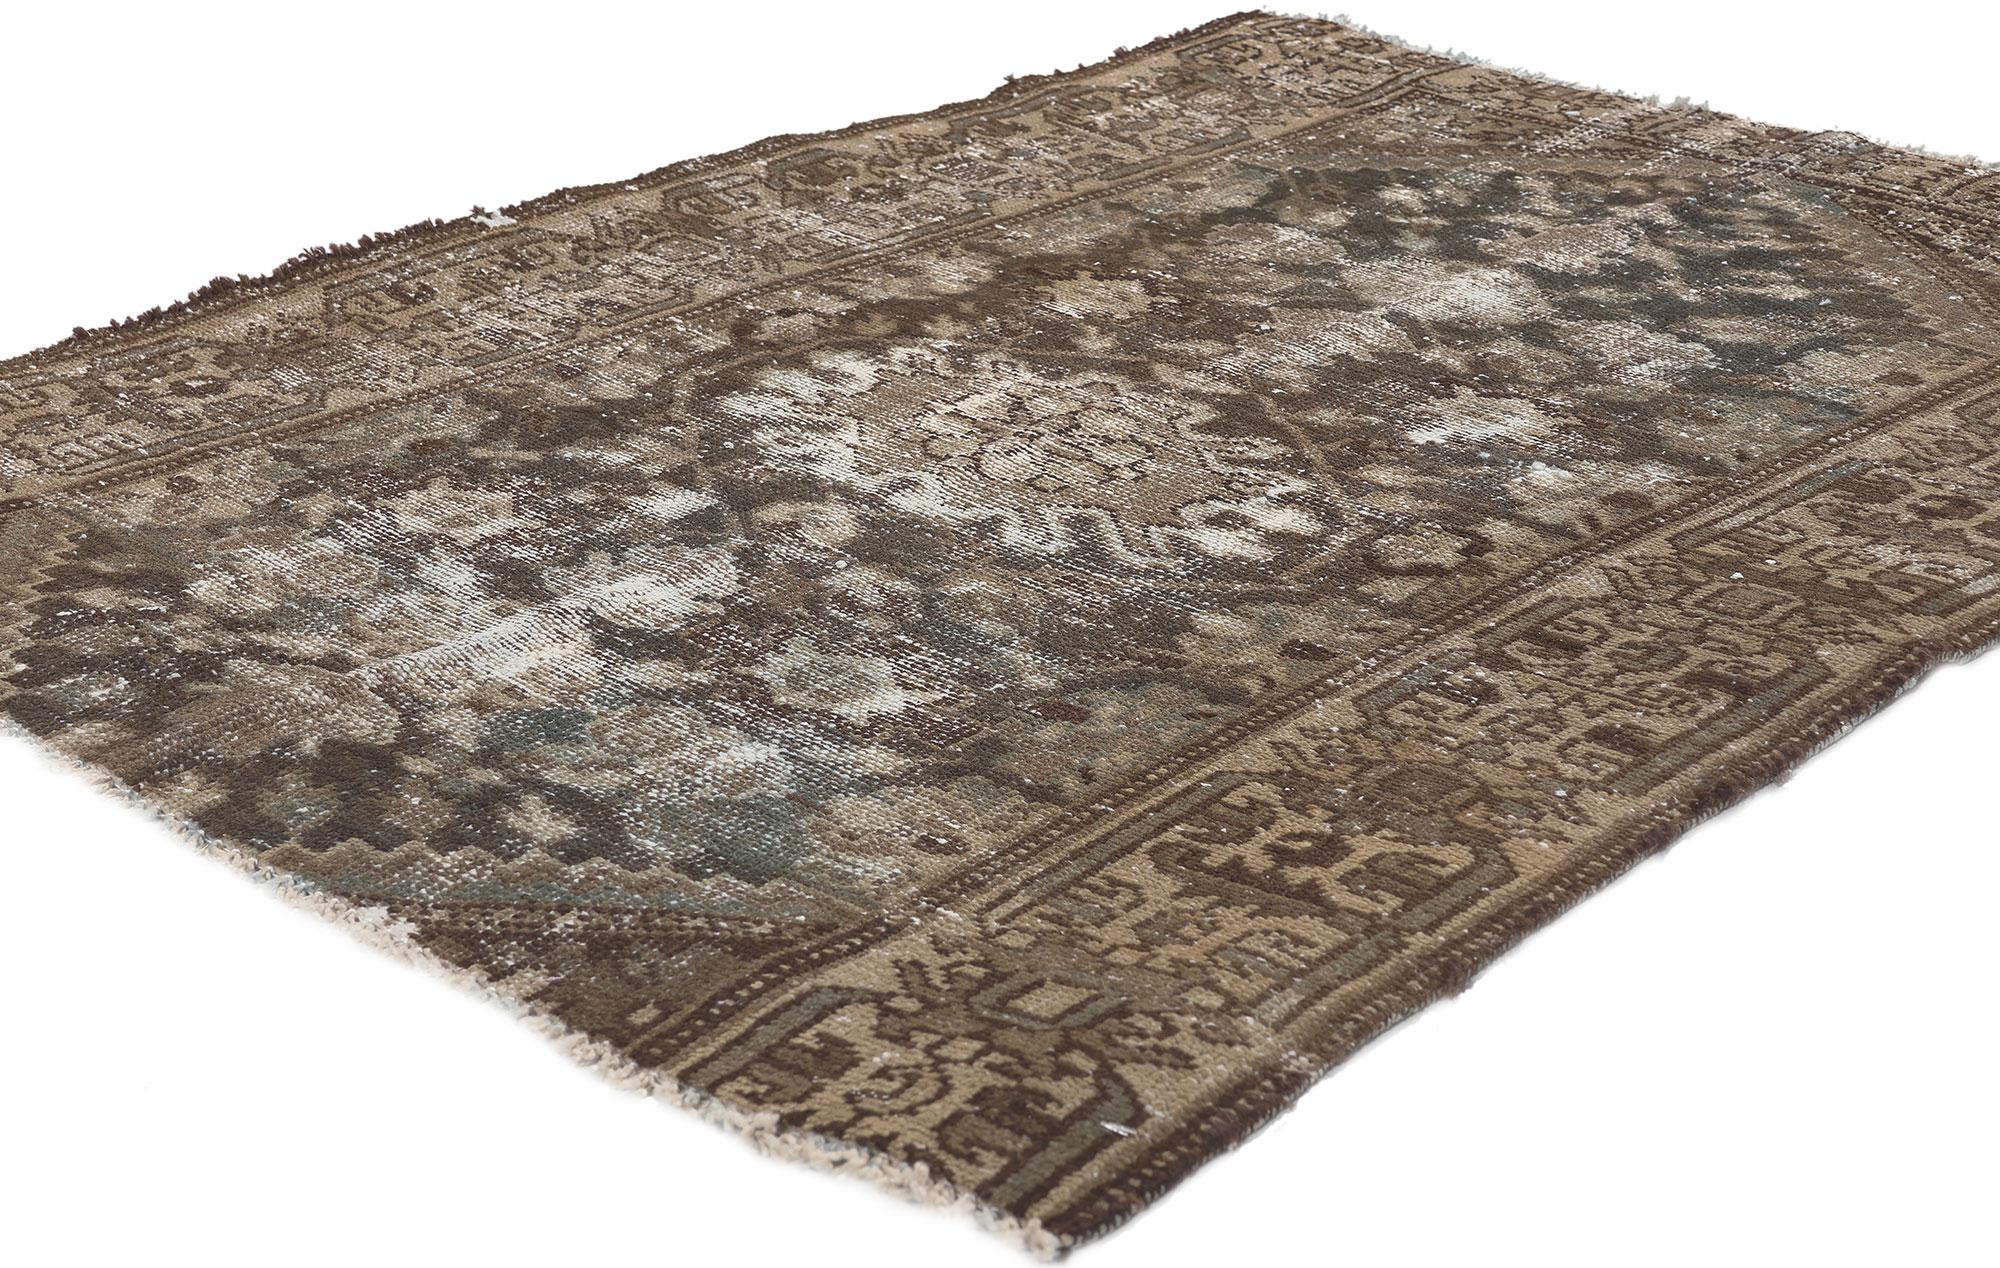 78577 Distressed Antique Worn Persian Hamadan Rug, 03'01 x 04'01. 
Weathered finesse meets rustic sensibility in this distressed antique Persian Hamadan rug. ​The faded geometric design and neutral earth-tone colors woven into this piece work